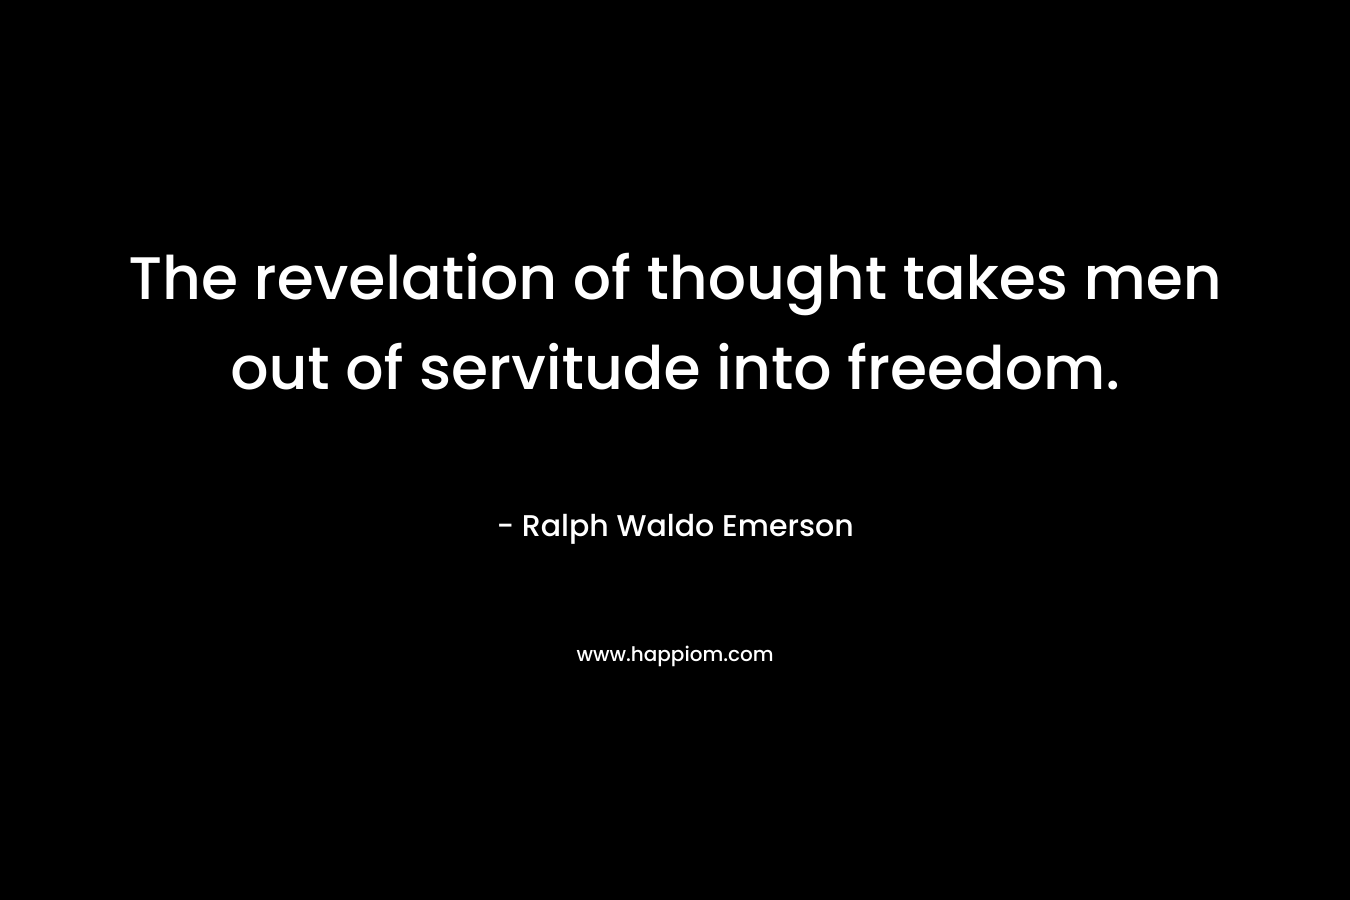 The revelation of thought takes men out of servitude into freedom. – Ralph Waldo Emerson